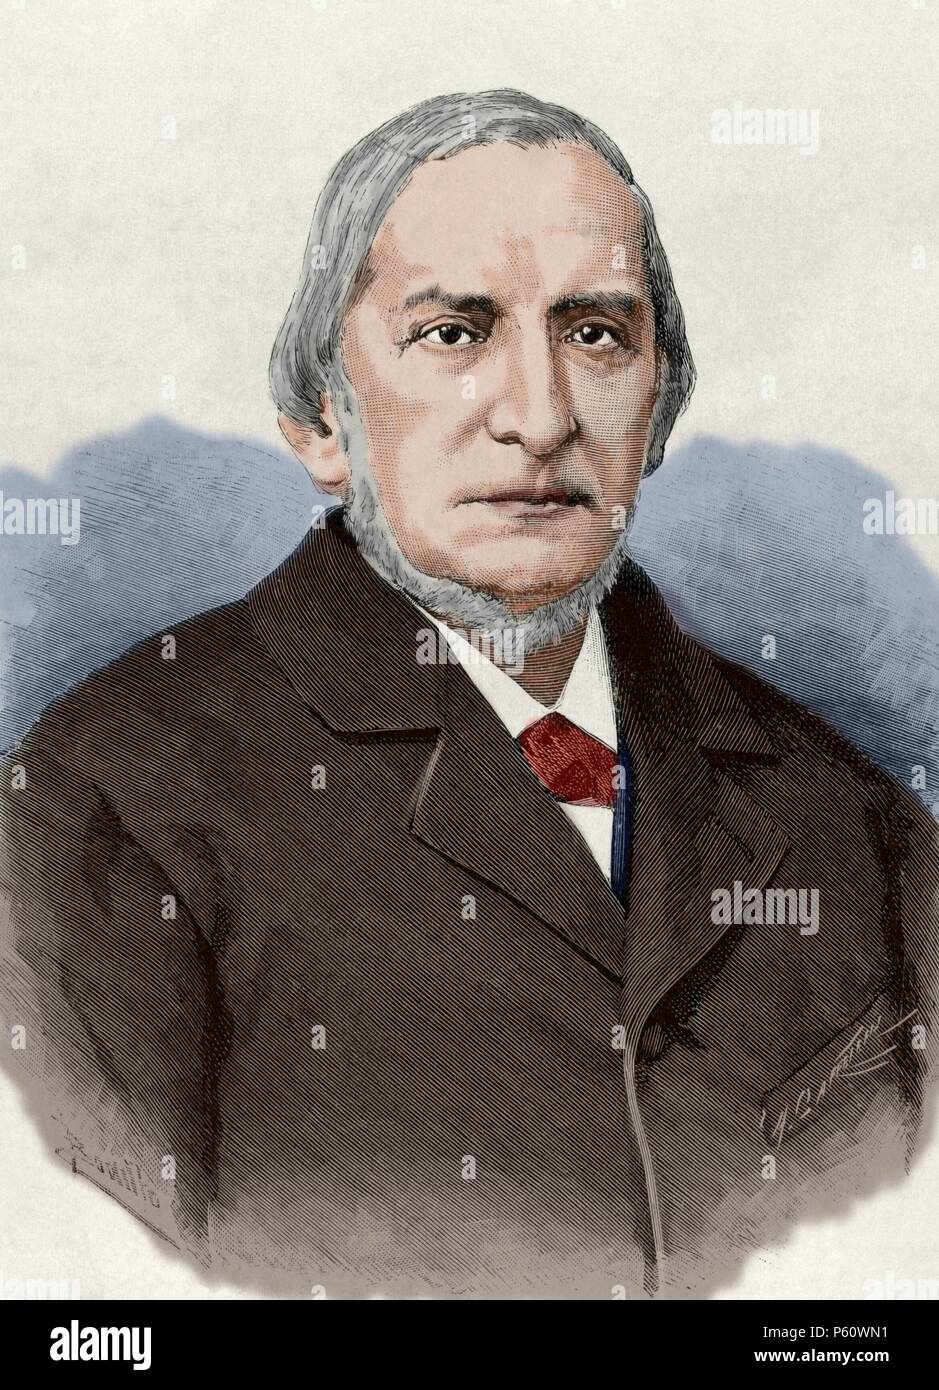 Miguel Colmeiro Penido (1816-1901). Spanish botanist. Engraving by Arturo Carretero. The Spanish and American Illustration, 1880. Colored. Stock Photo